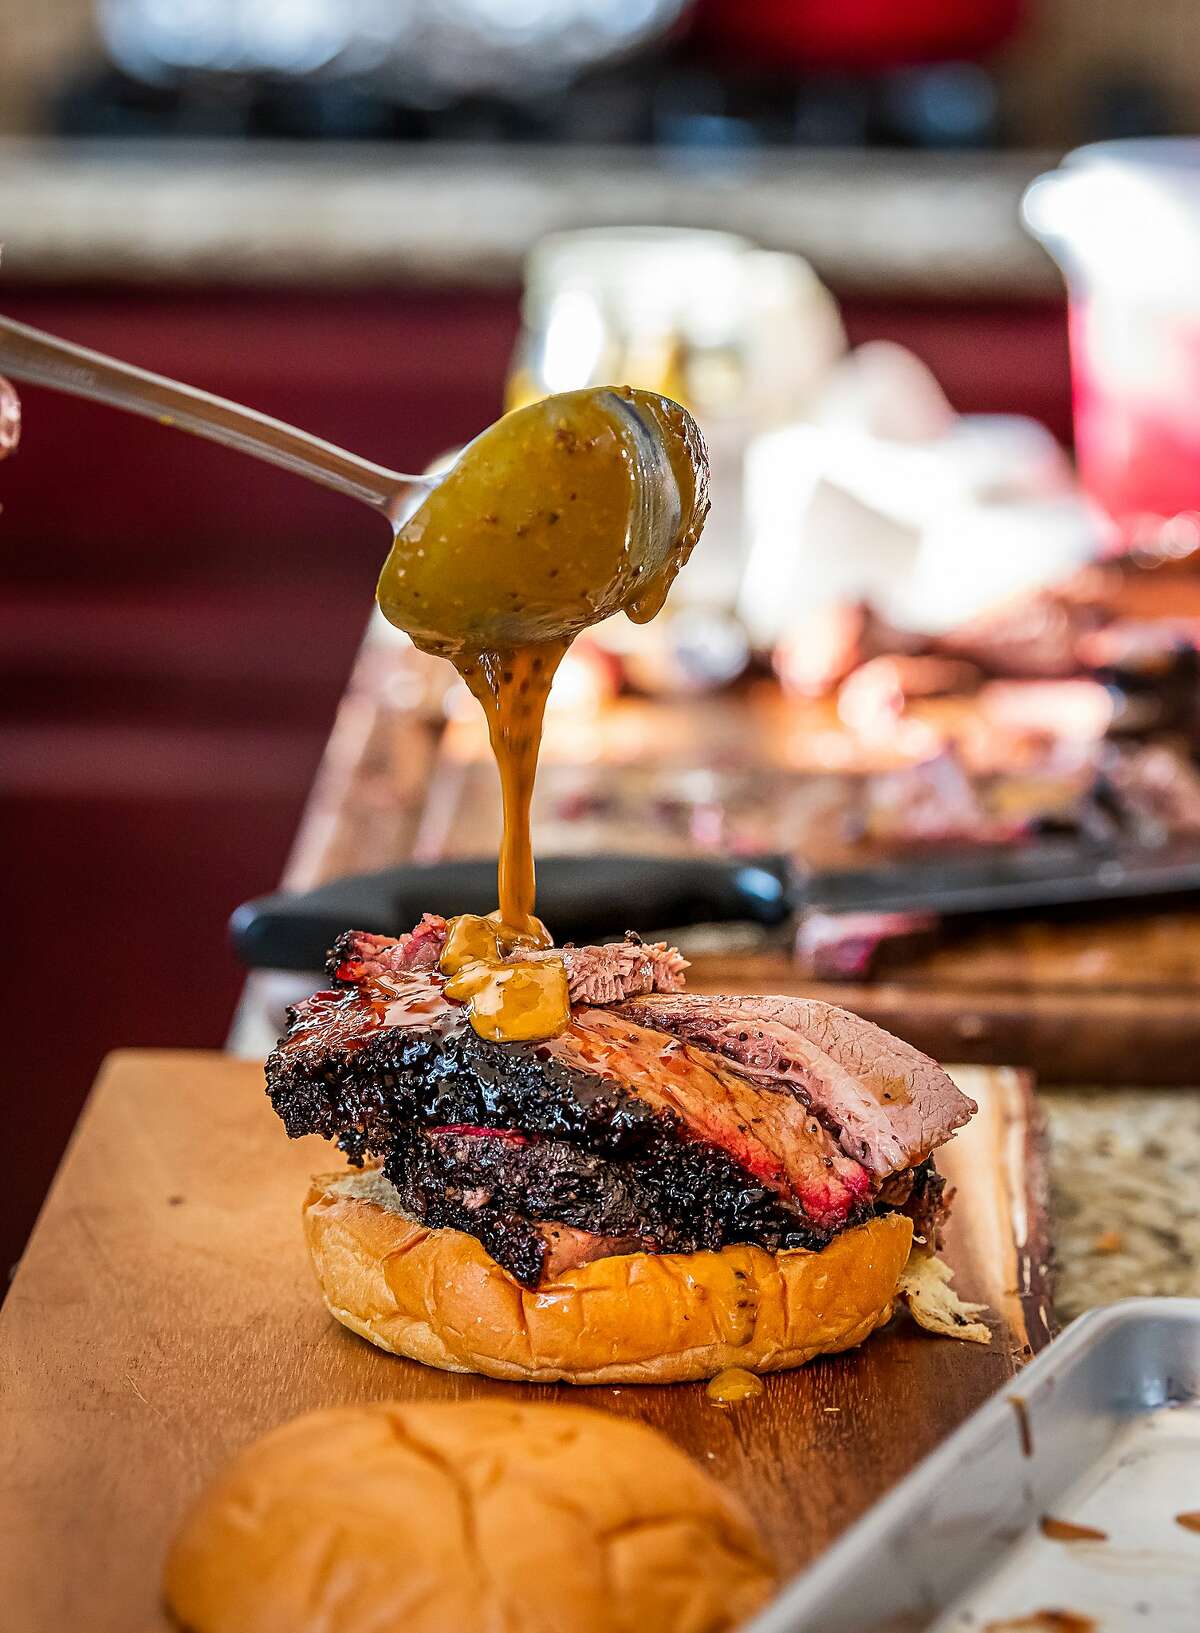 Sandwiches, including tri-tip, pulled pork and the pictured brisket with pickled onions, will cost $15.